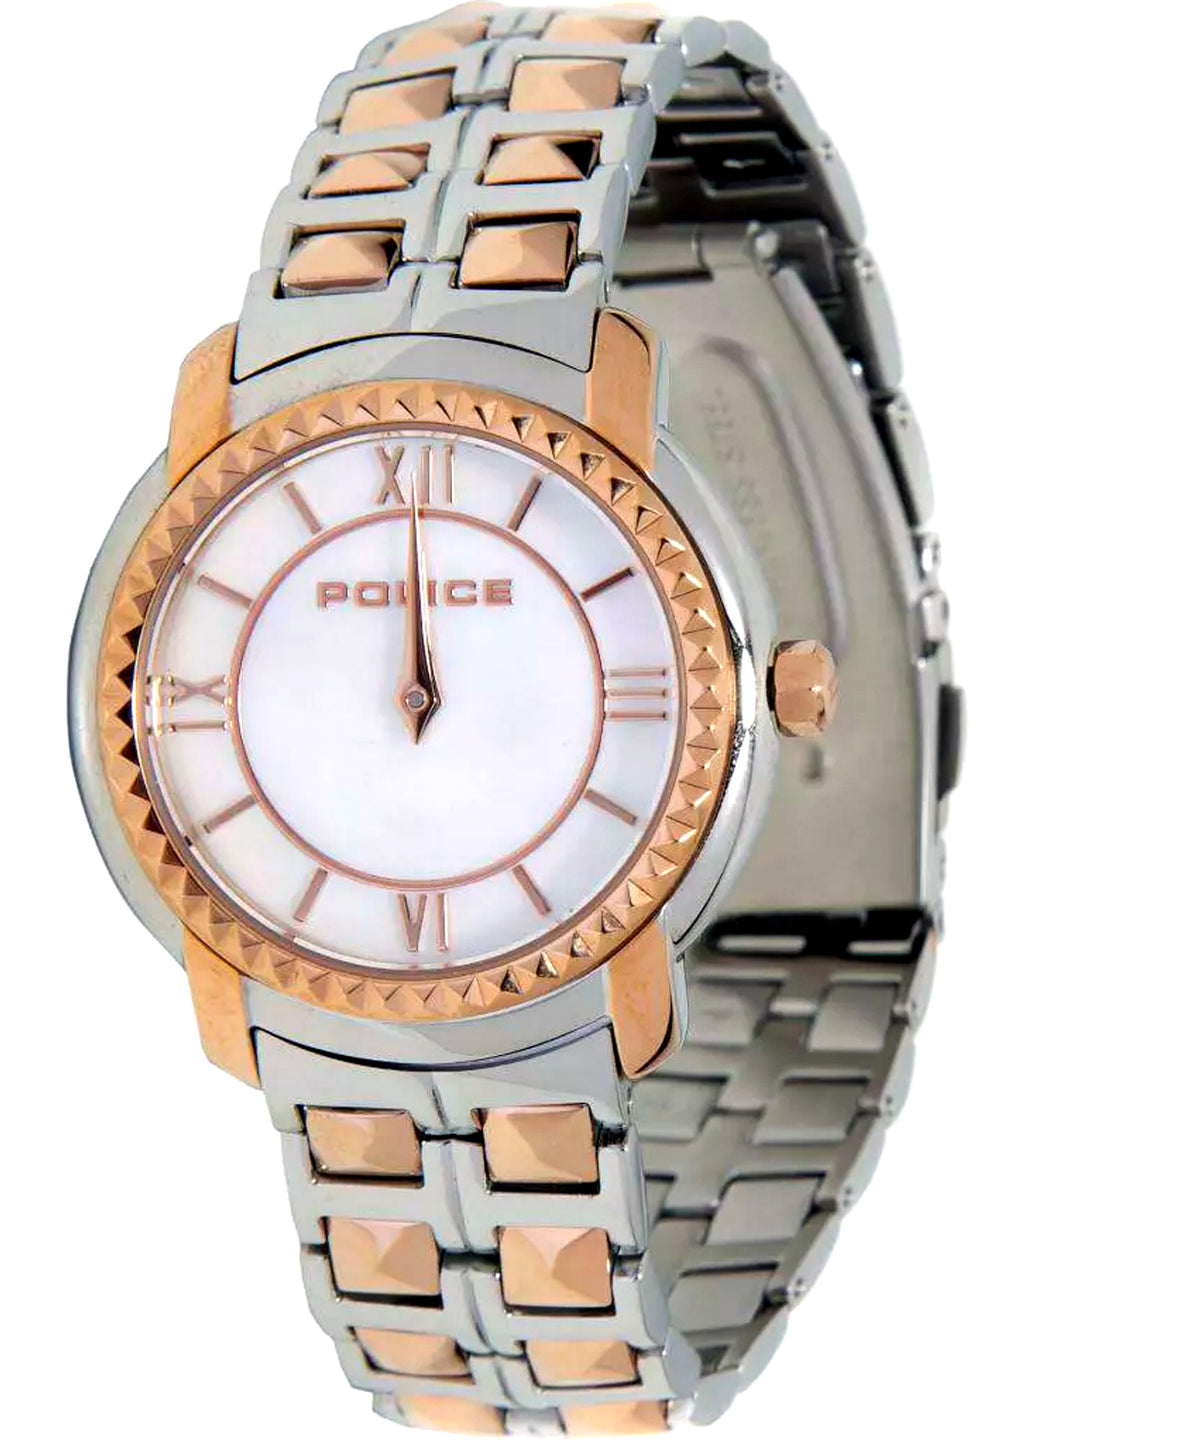 Police Women's Watch Analog, White Dial Silver & Gold Stainless Band, P15442LSTG-2